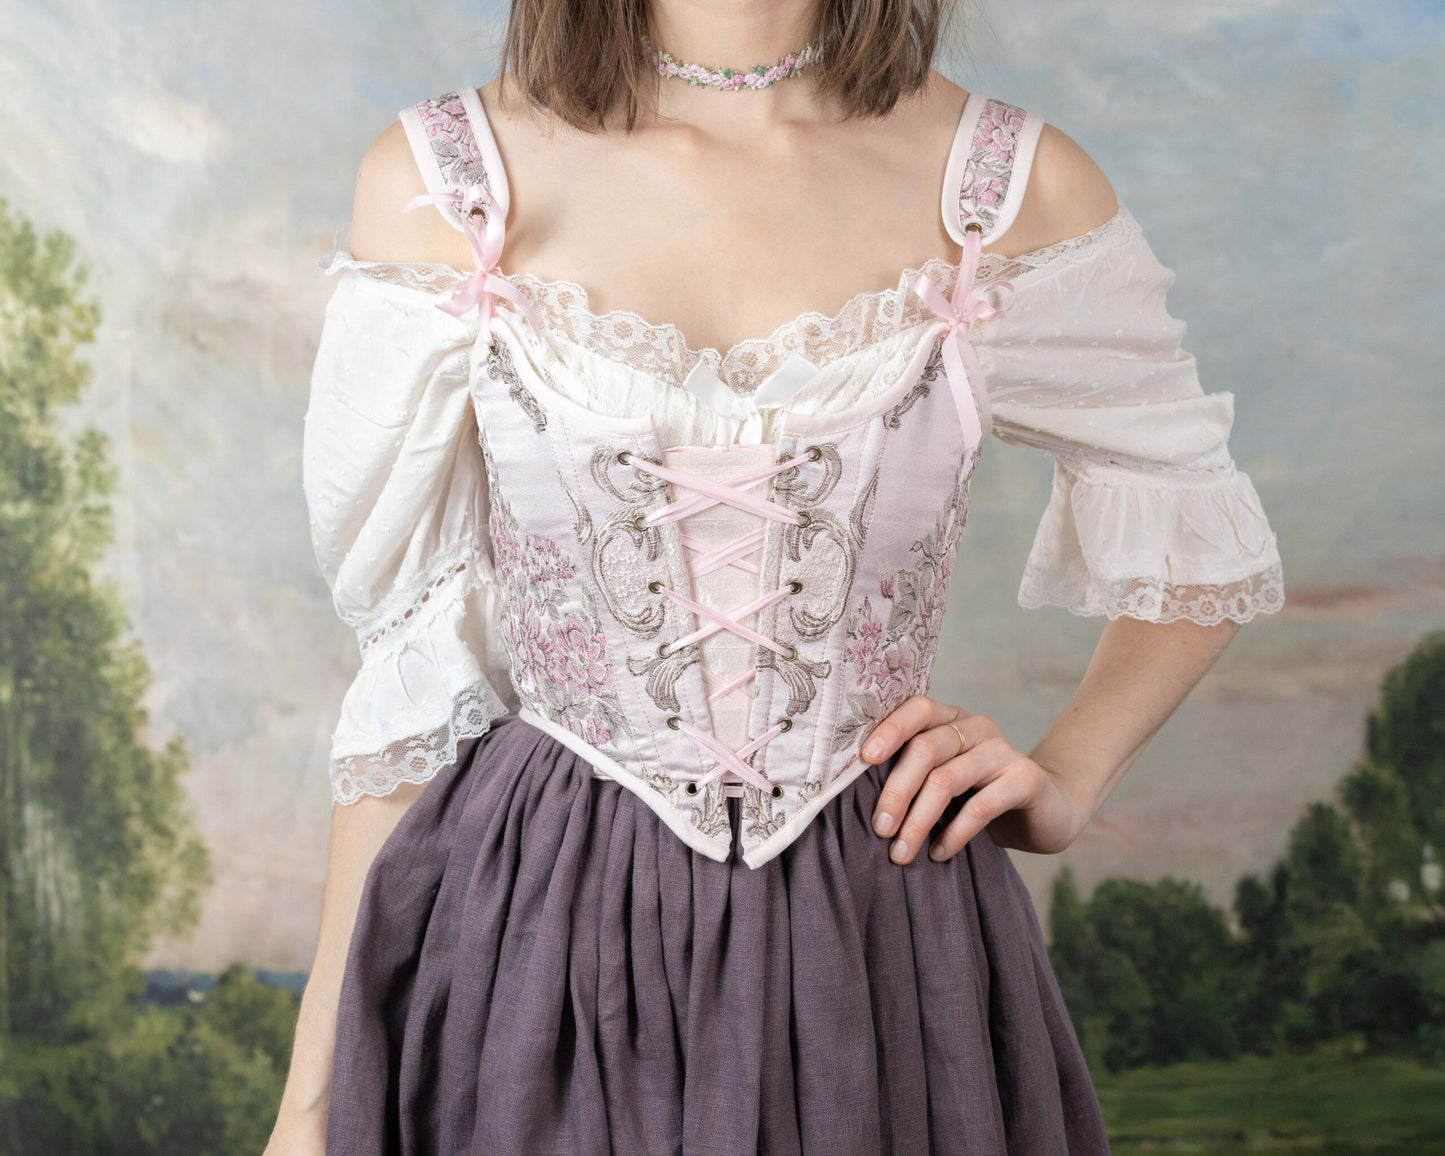 Light Pink Rococo Renaissance Bodice – French Meadows